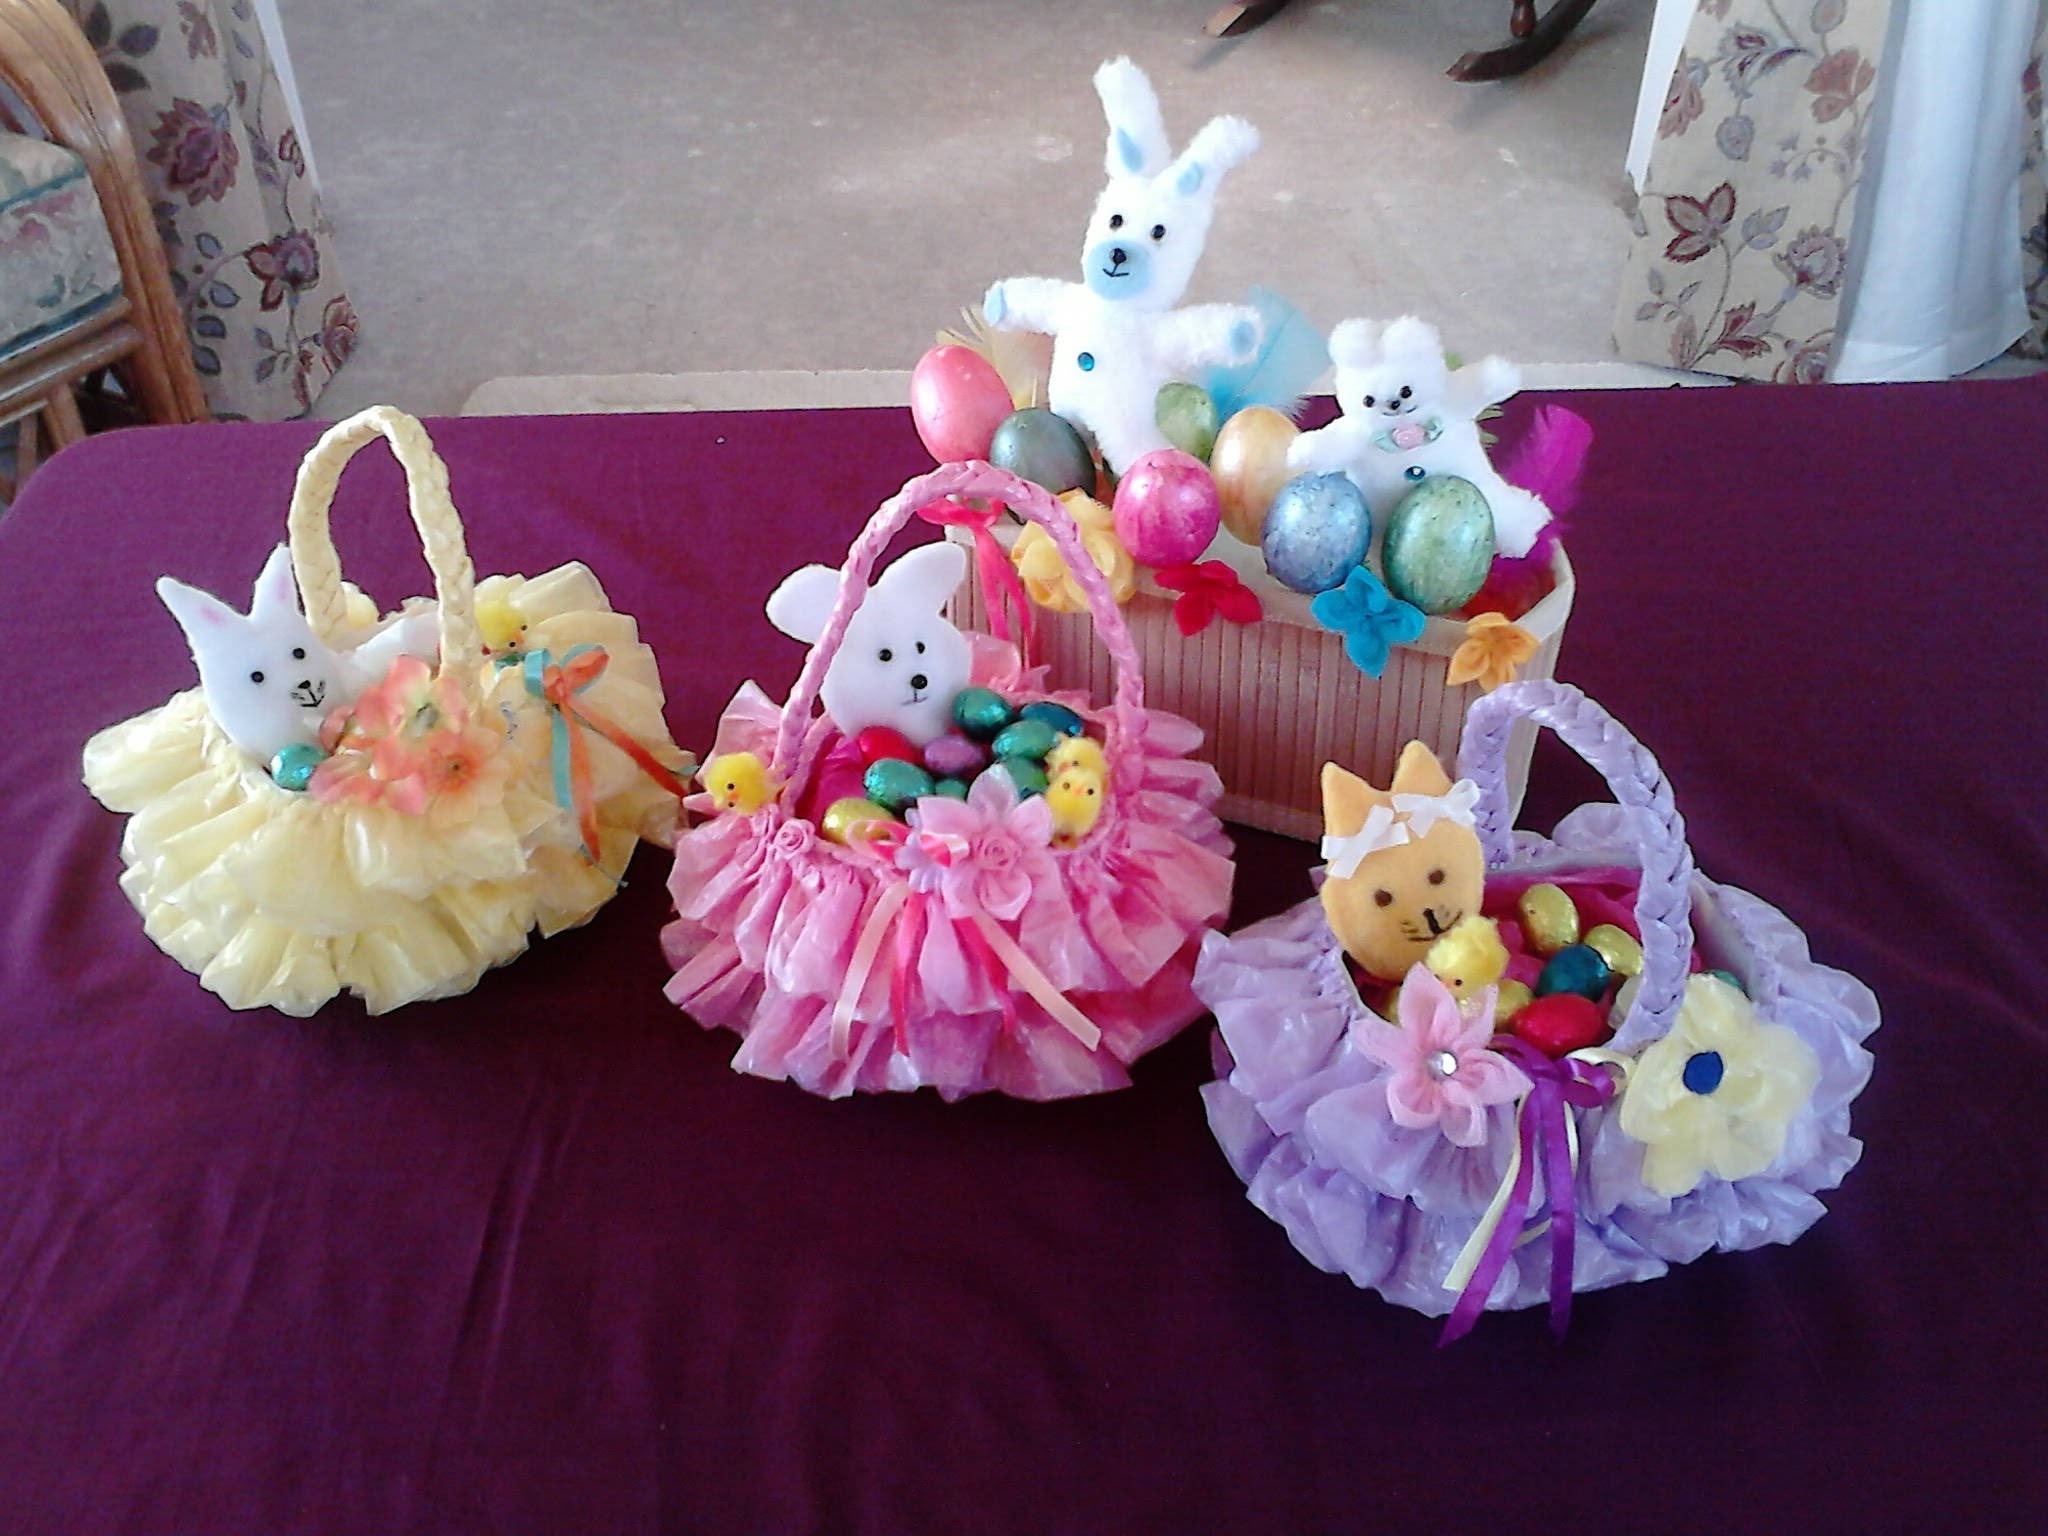 Easter baskets made from recycled plastic bags and bottles